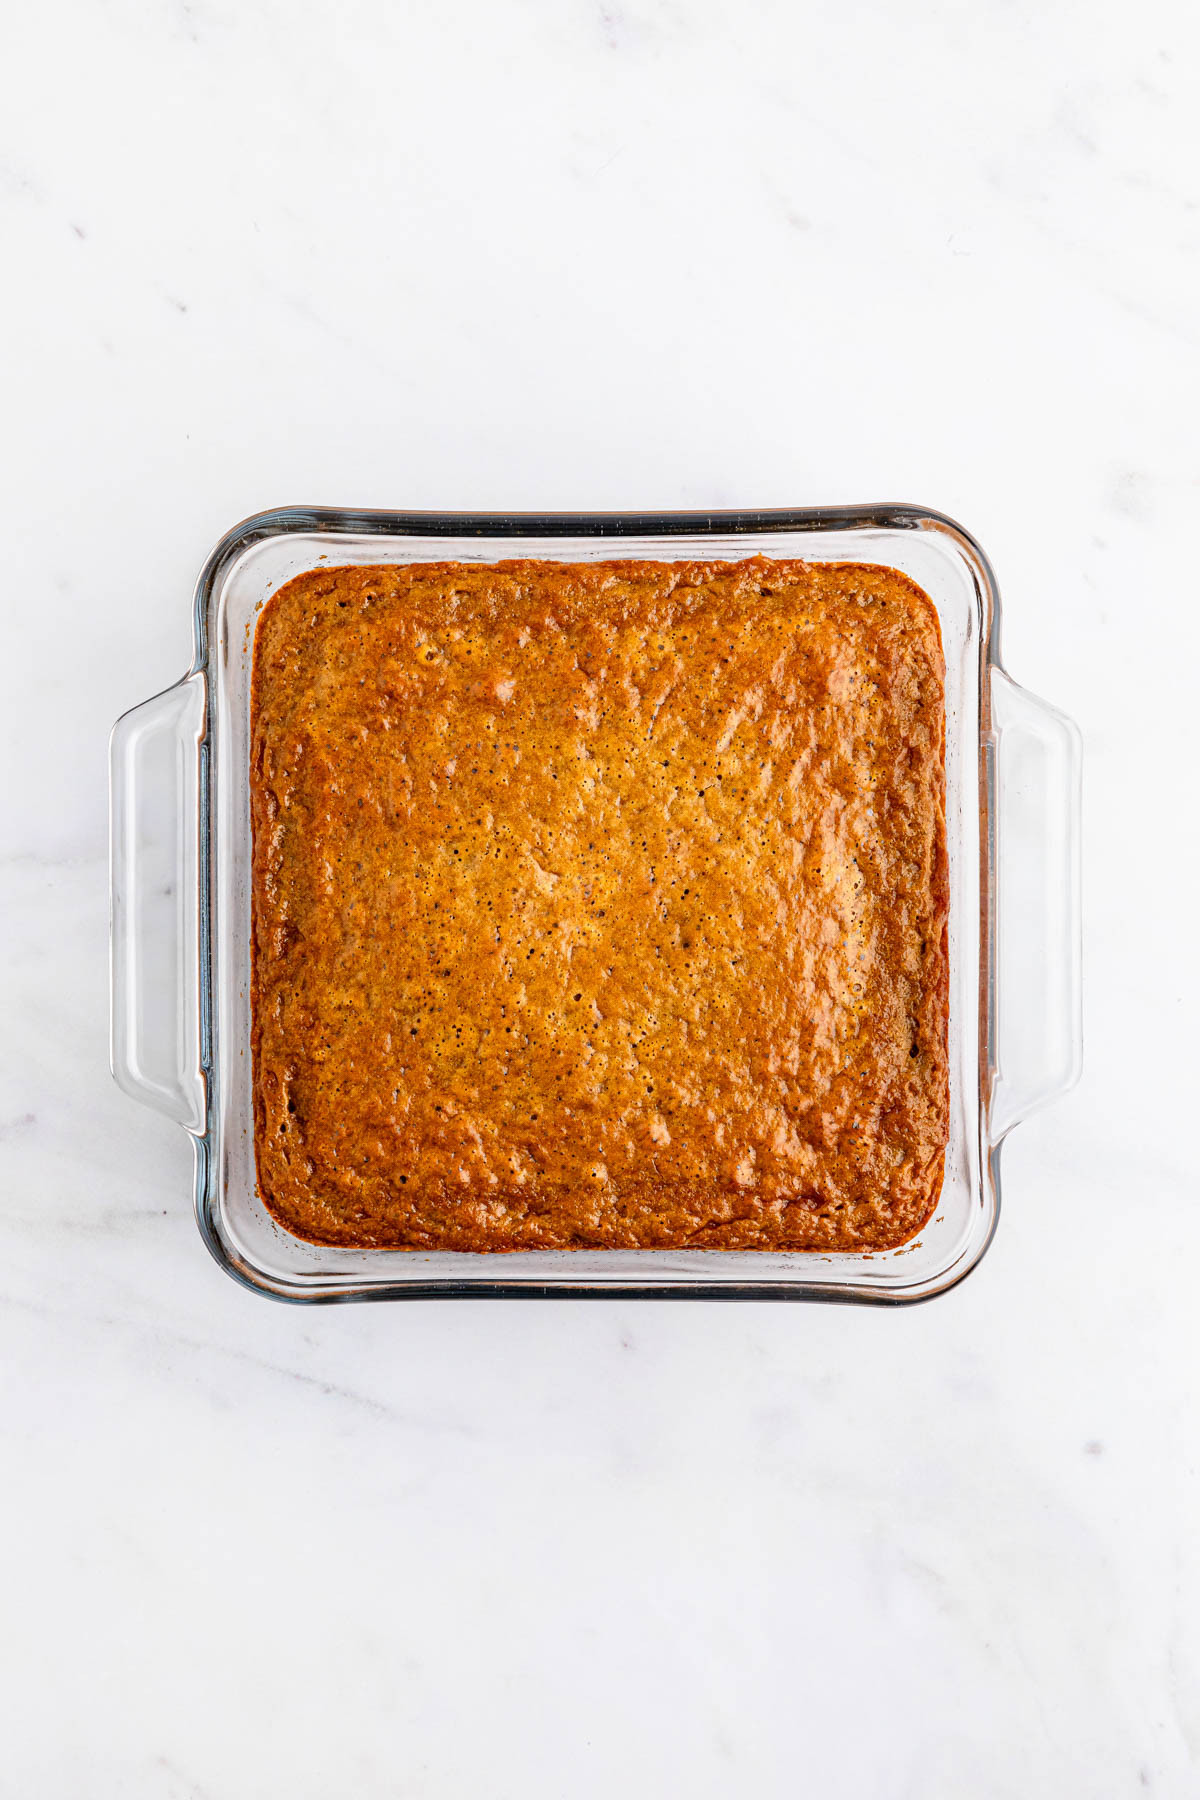 Gingerbread cake in a glass baking dish.